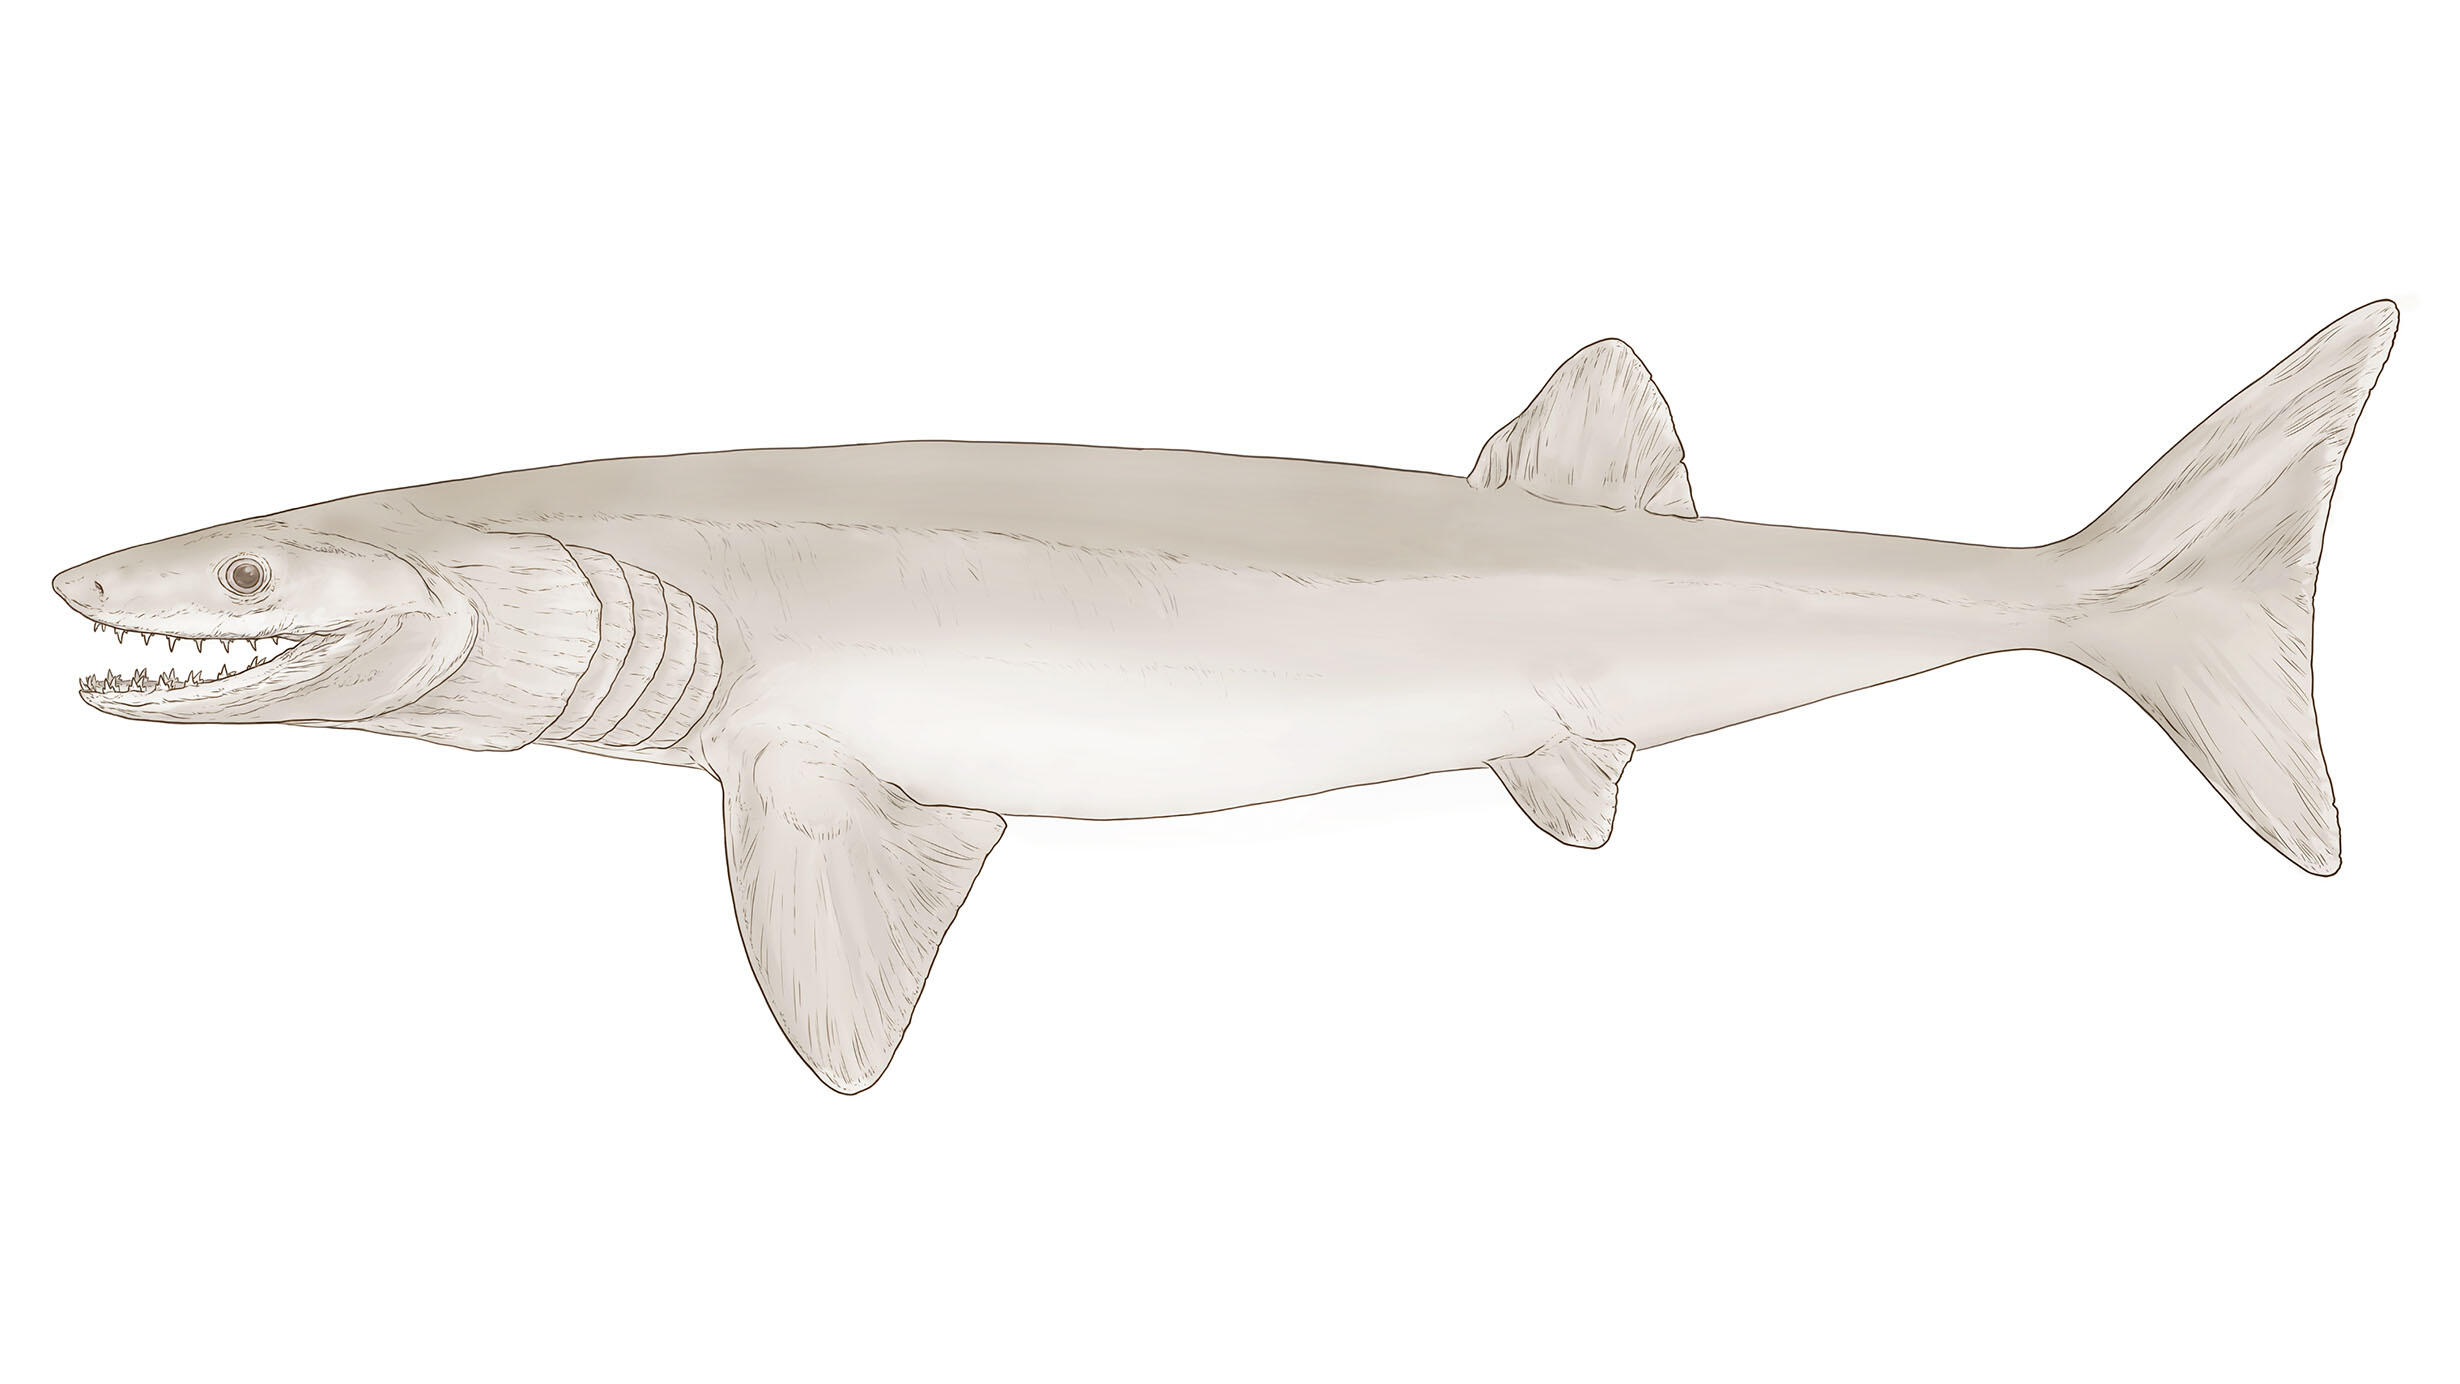 Illustration of a Cosmoselachus, an ancient shark-like species.